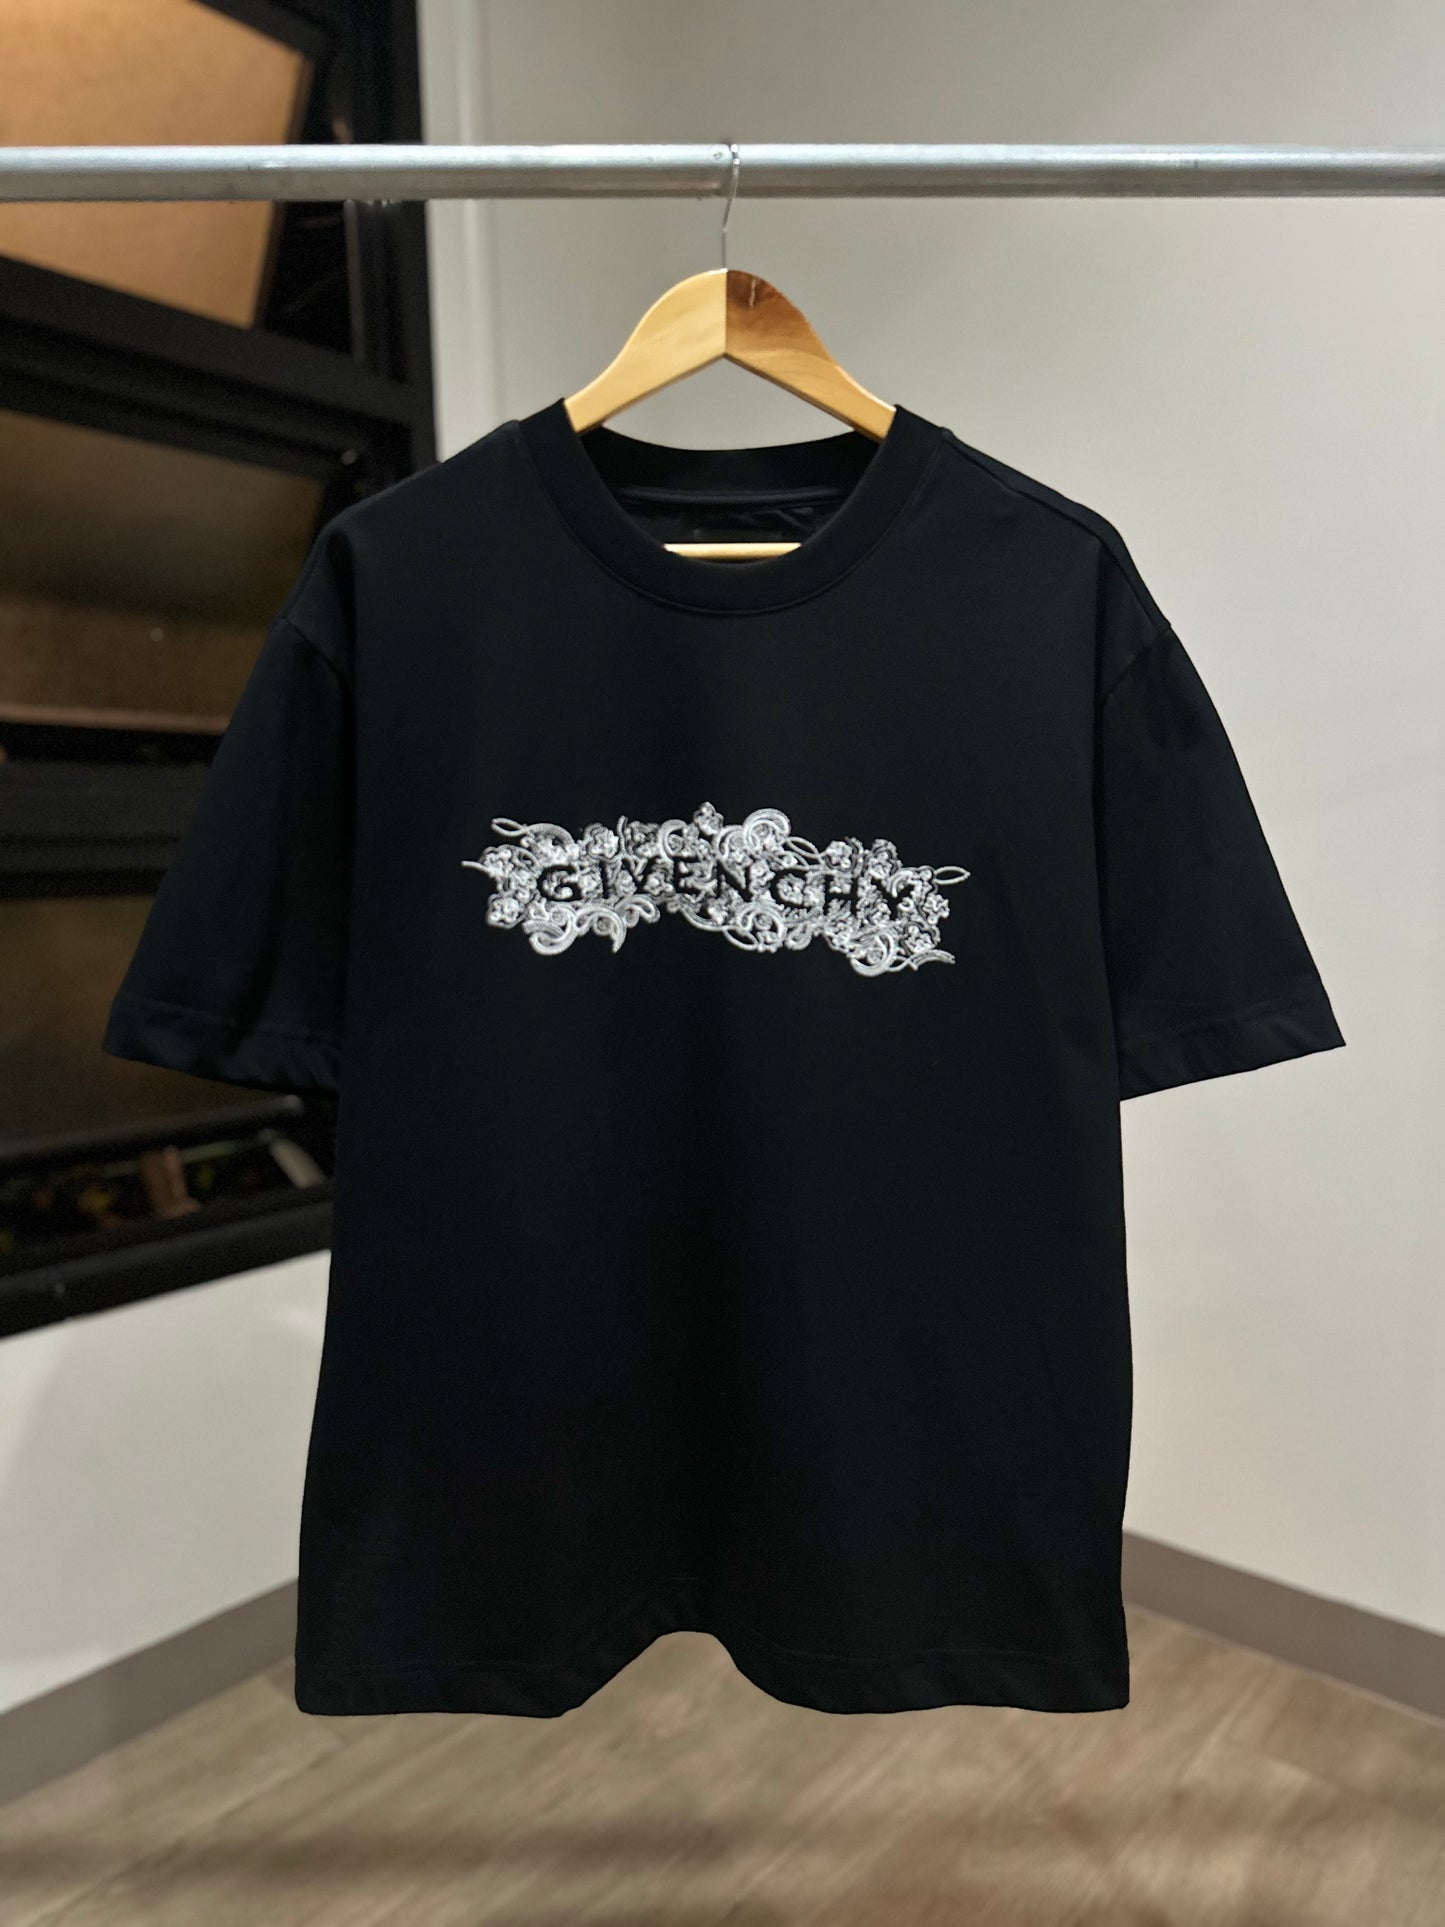 Givenchy T-Shirt (Embroid/Black)